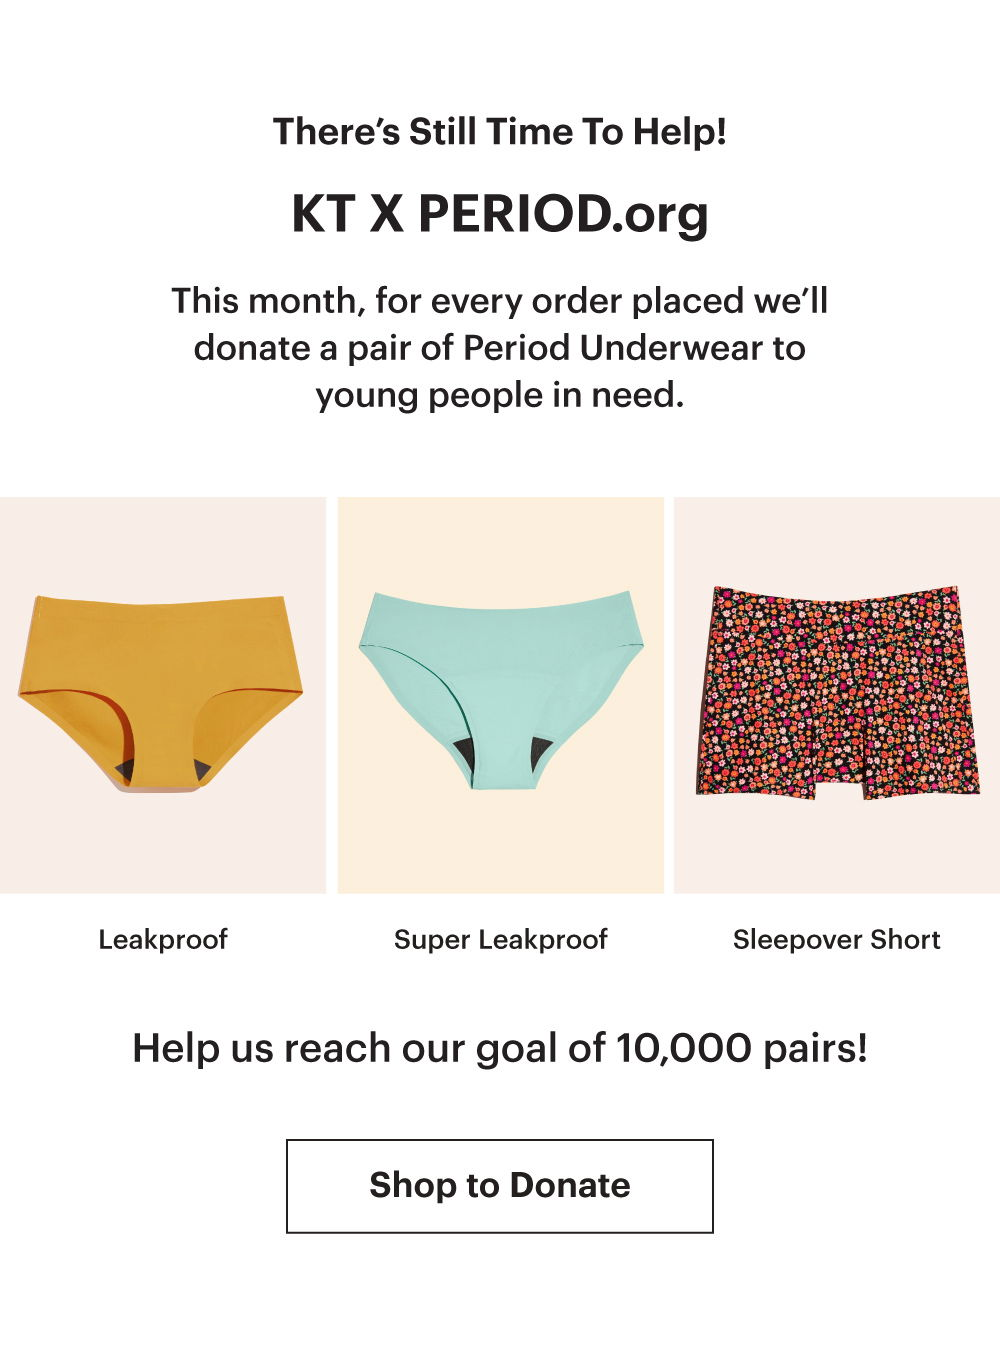 Kt by Knix: Period undies as low as $12! 🤯